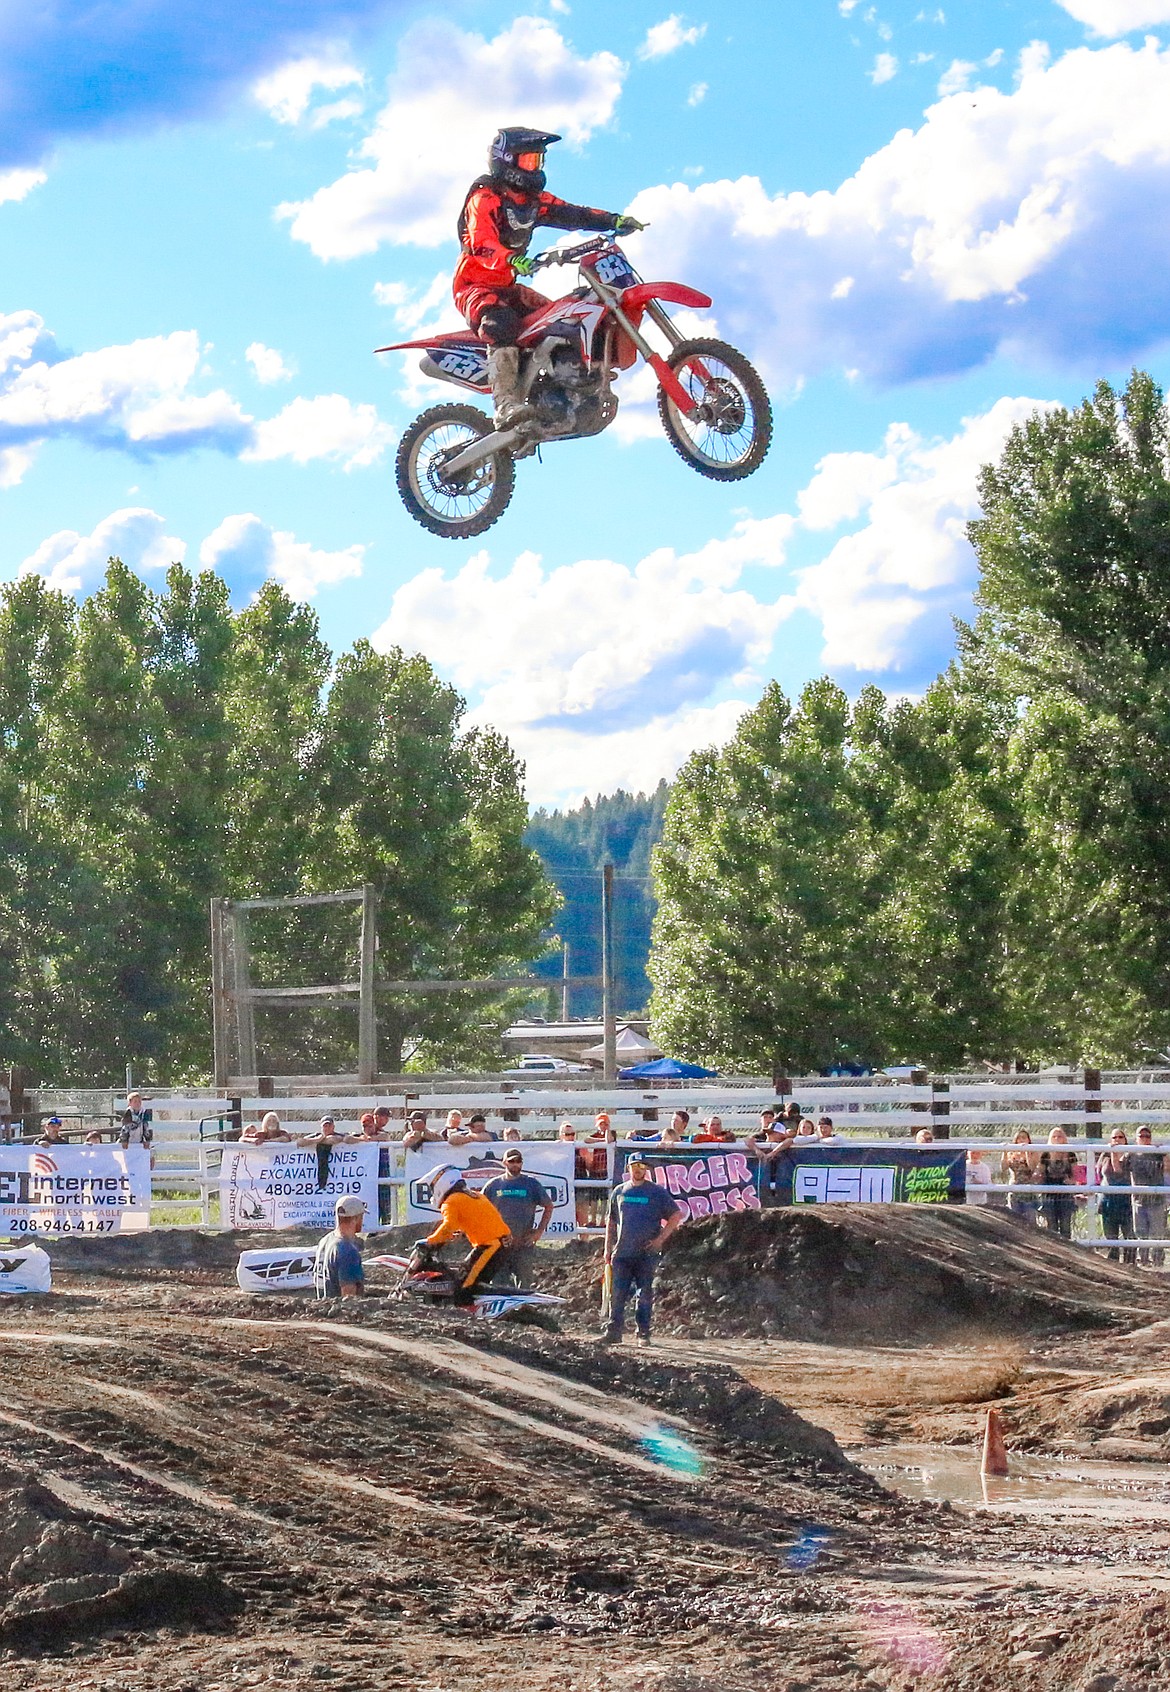 Photo by MANDI BATEMAN
A rider soars through the air on June 29, at the 9B Arenacross event at the Boundary County Fairgrounds. The event featured 142 riders, ranging from local dirt bike enthusiasts to competitors at national events.